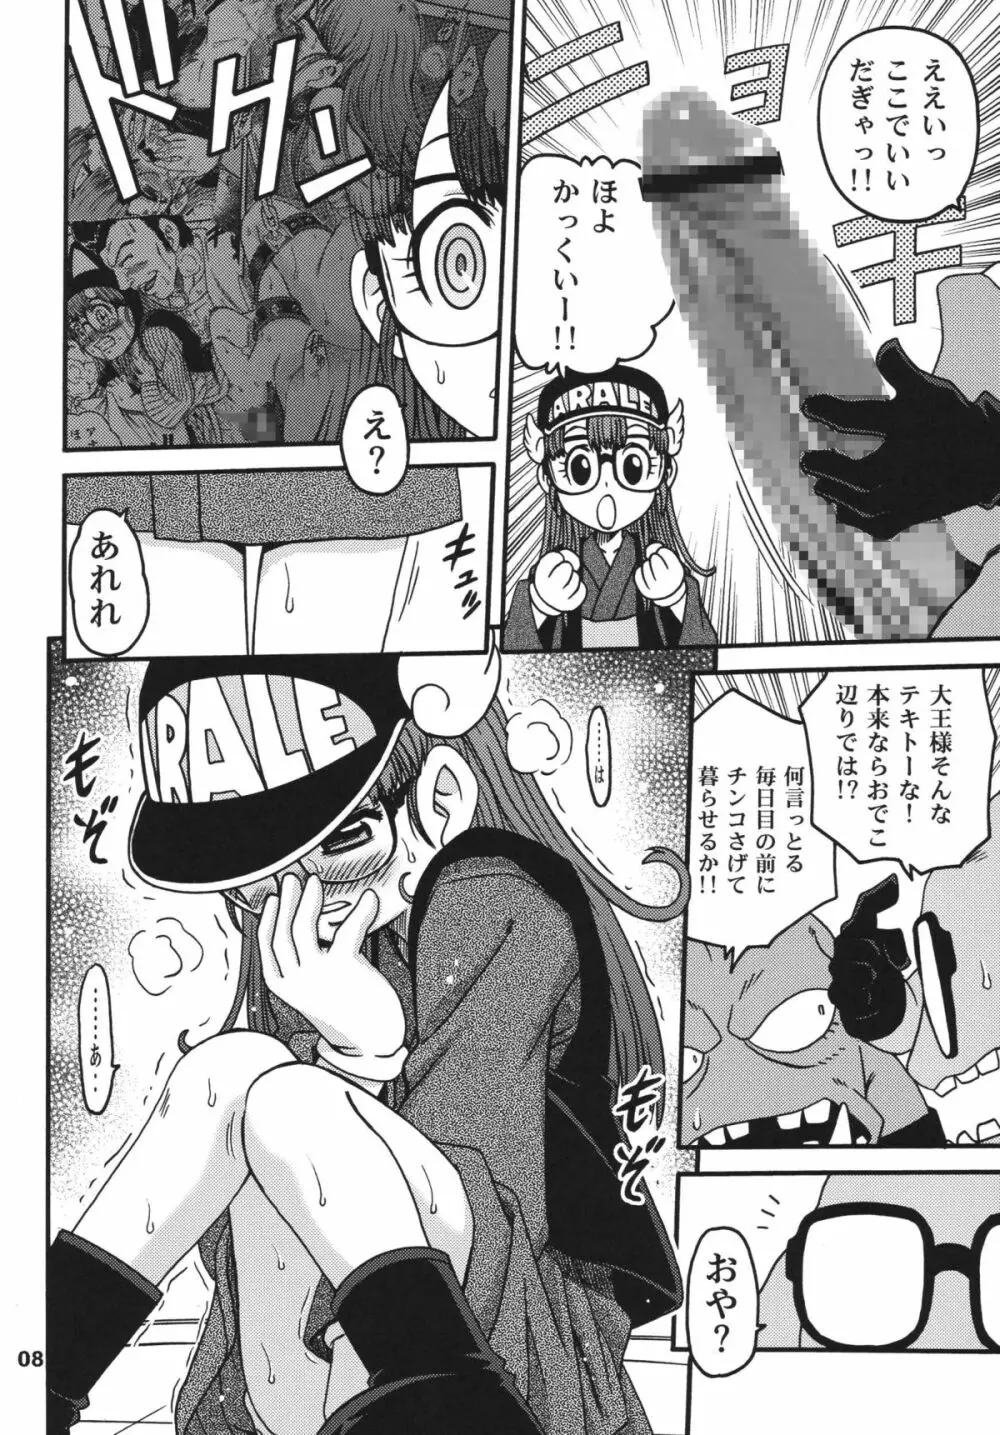 PROJECT ARALE 2 - page8